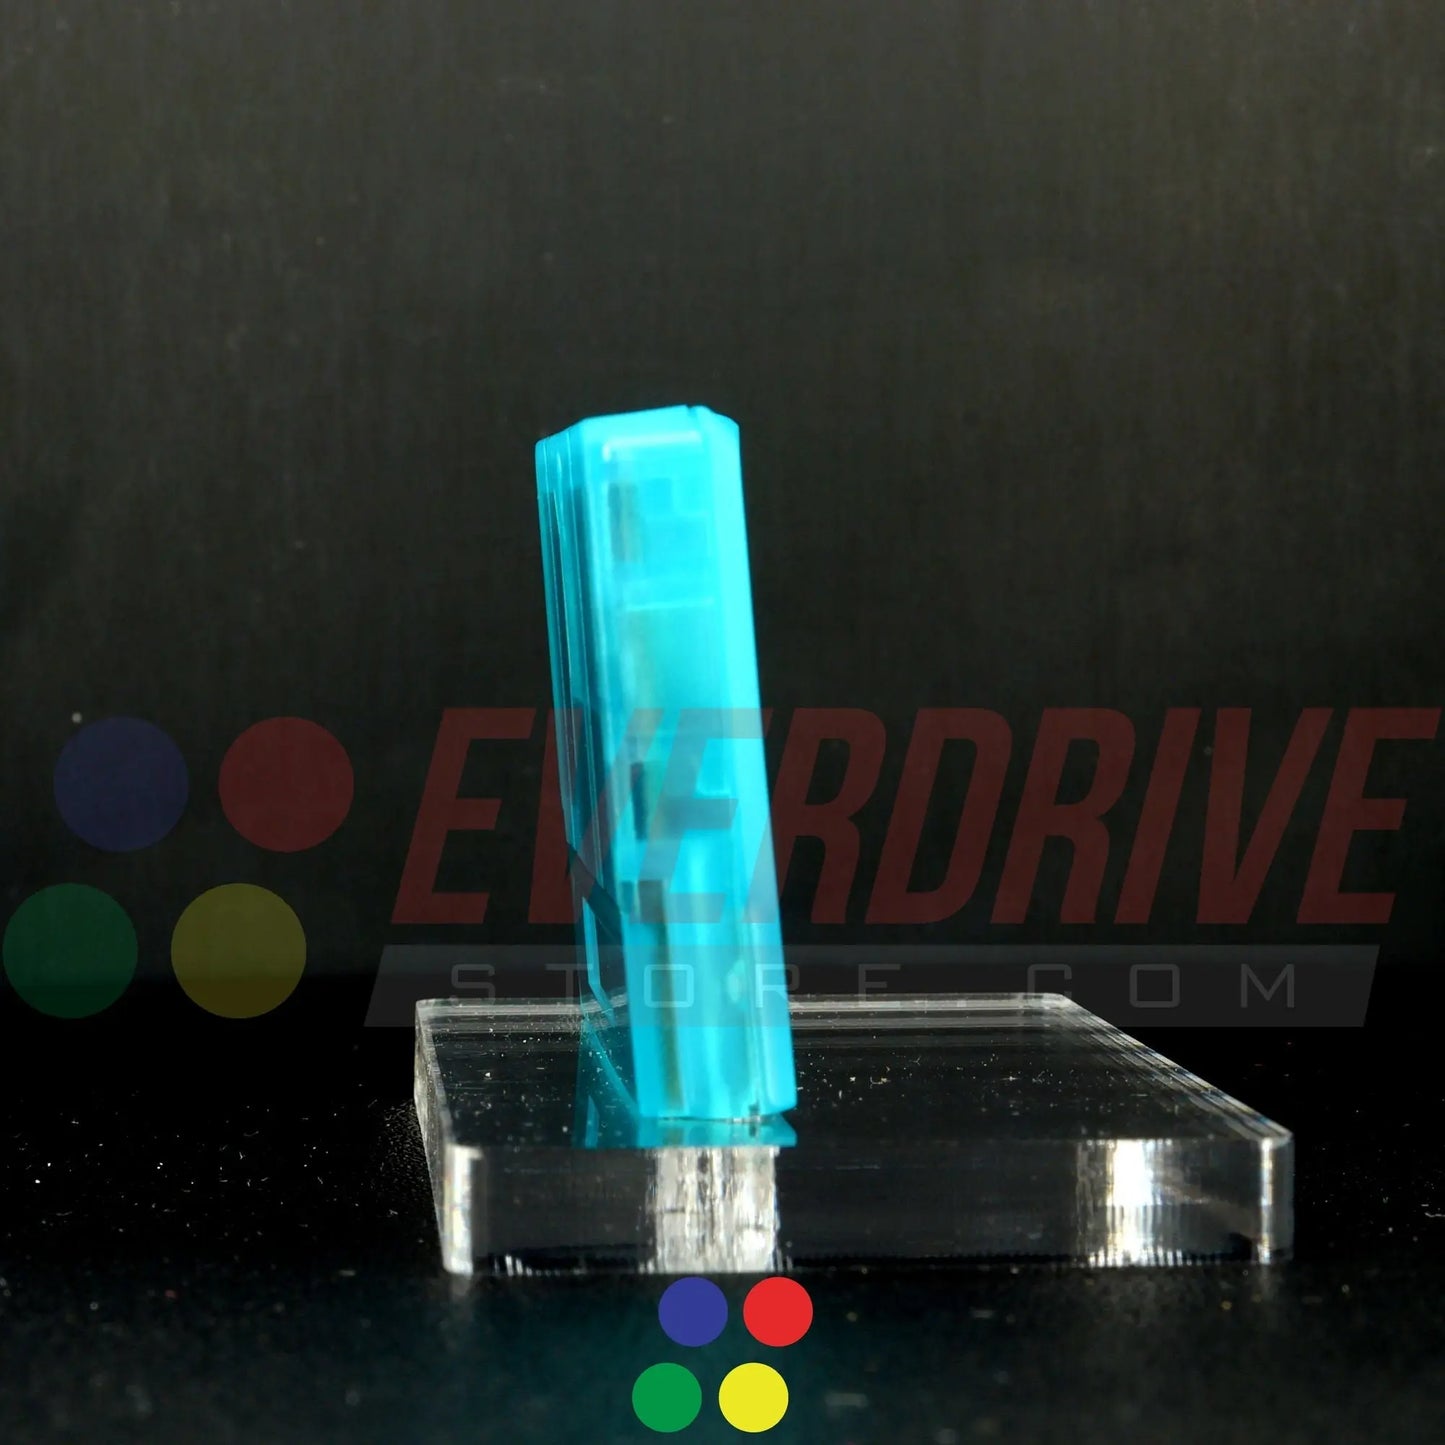 Everdrive GBA Mini - Frosted Turquoise Krikzz